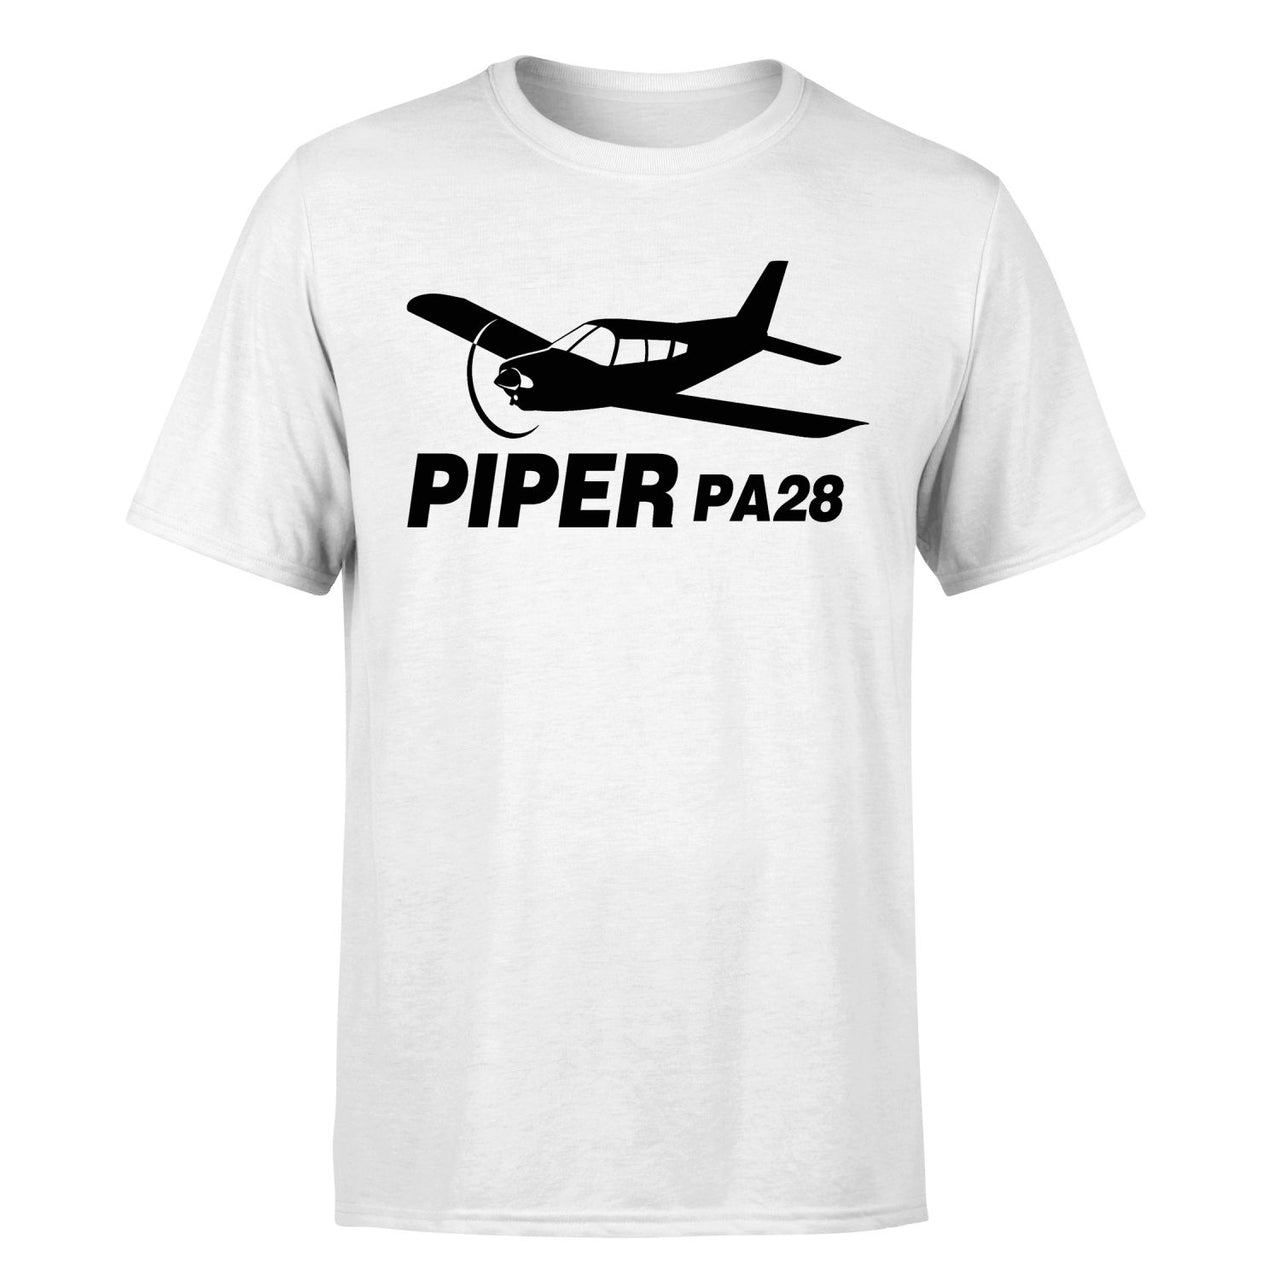 The Piper PA28 Designed T-Shirts